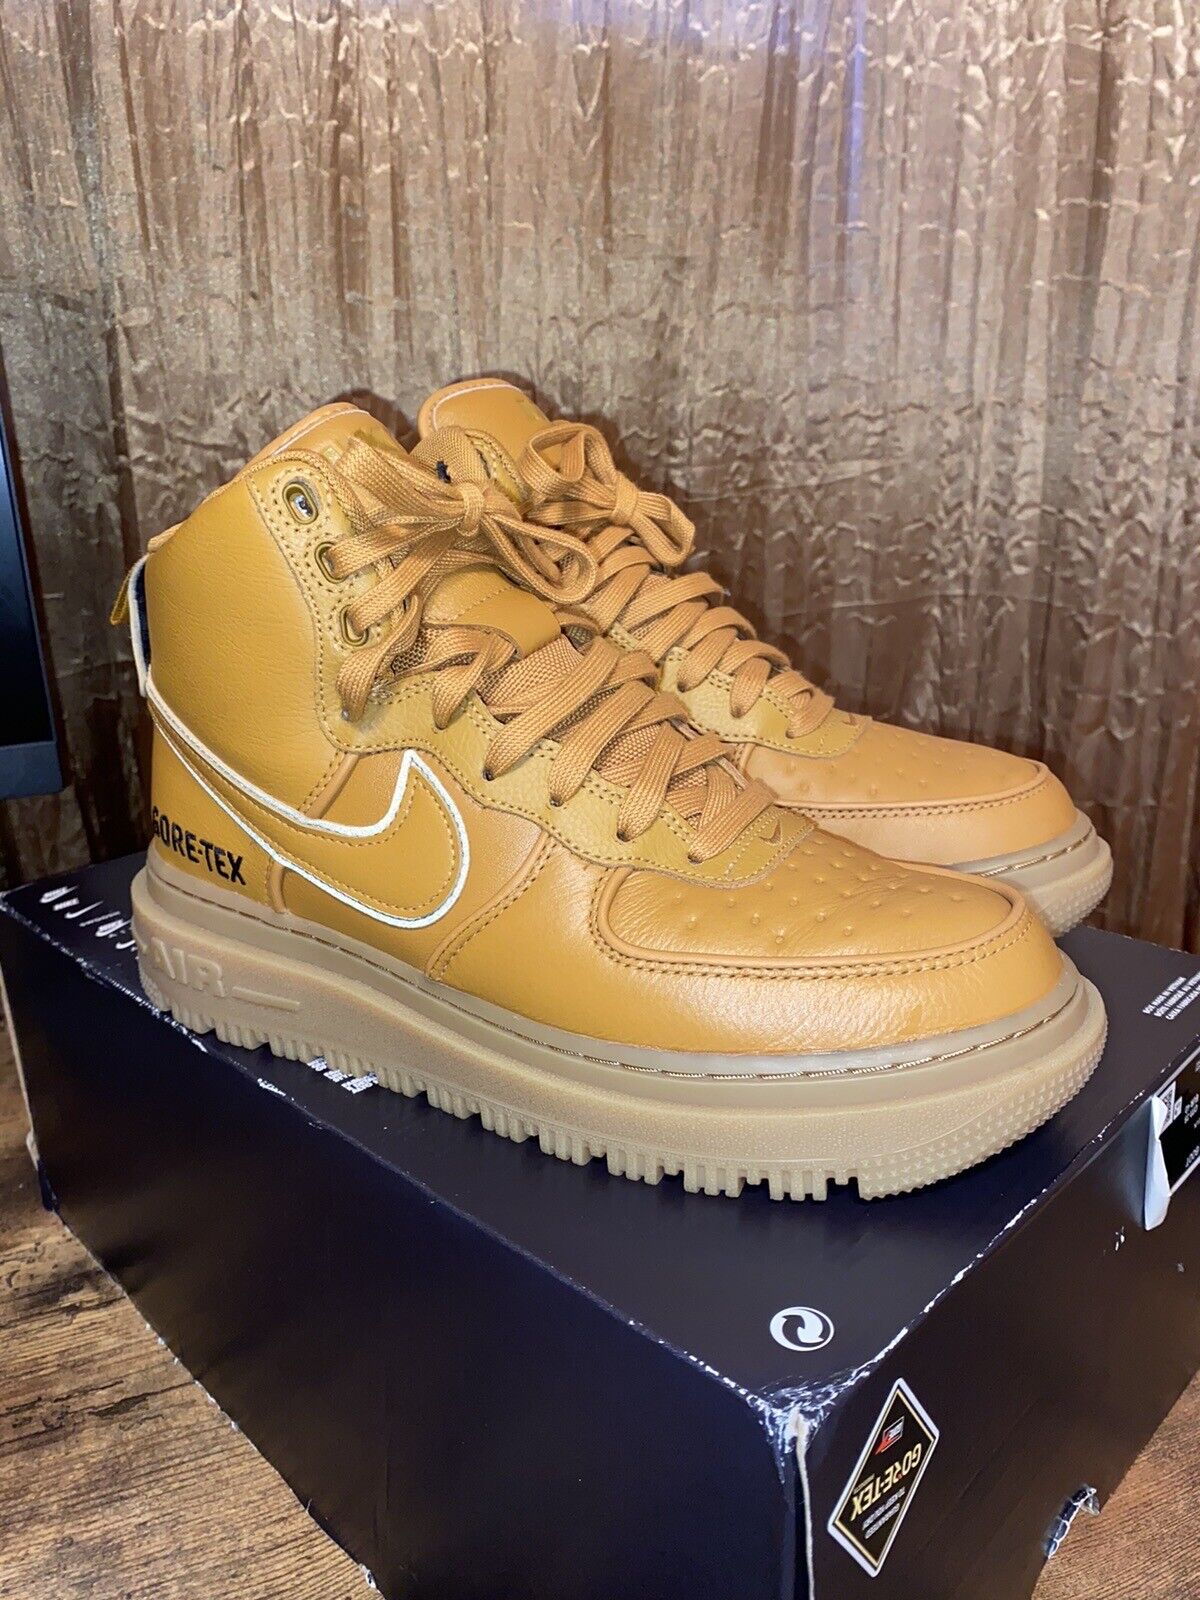 Size 7 - Nike Air Force 1 GTX Goretex Boots 2020 - image 6